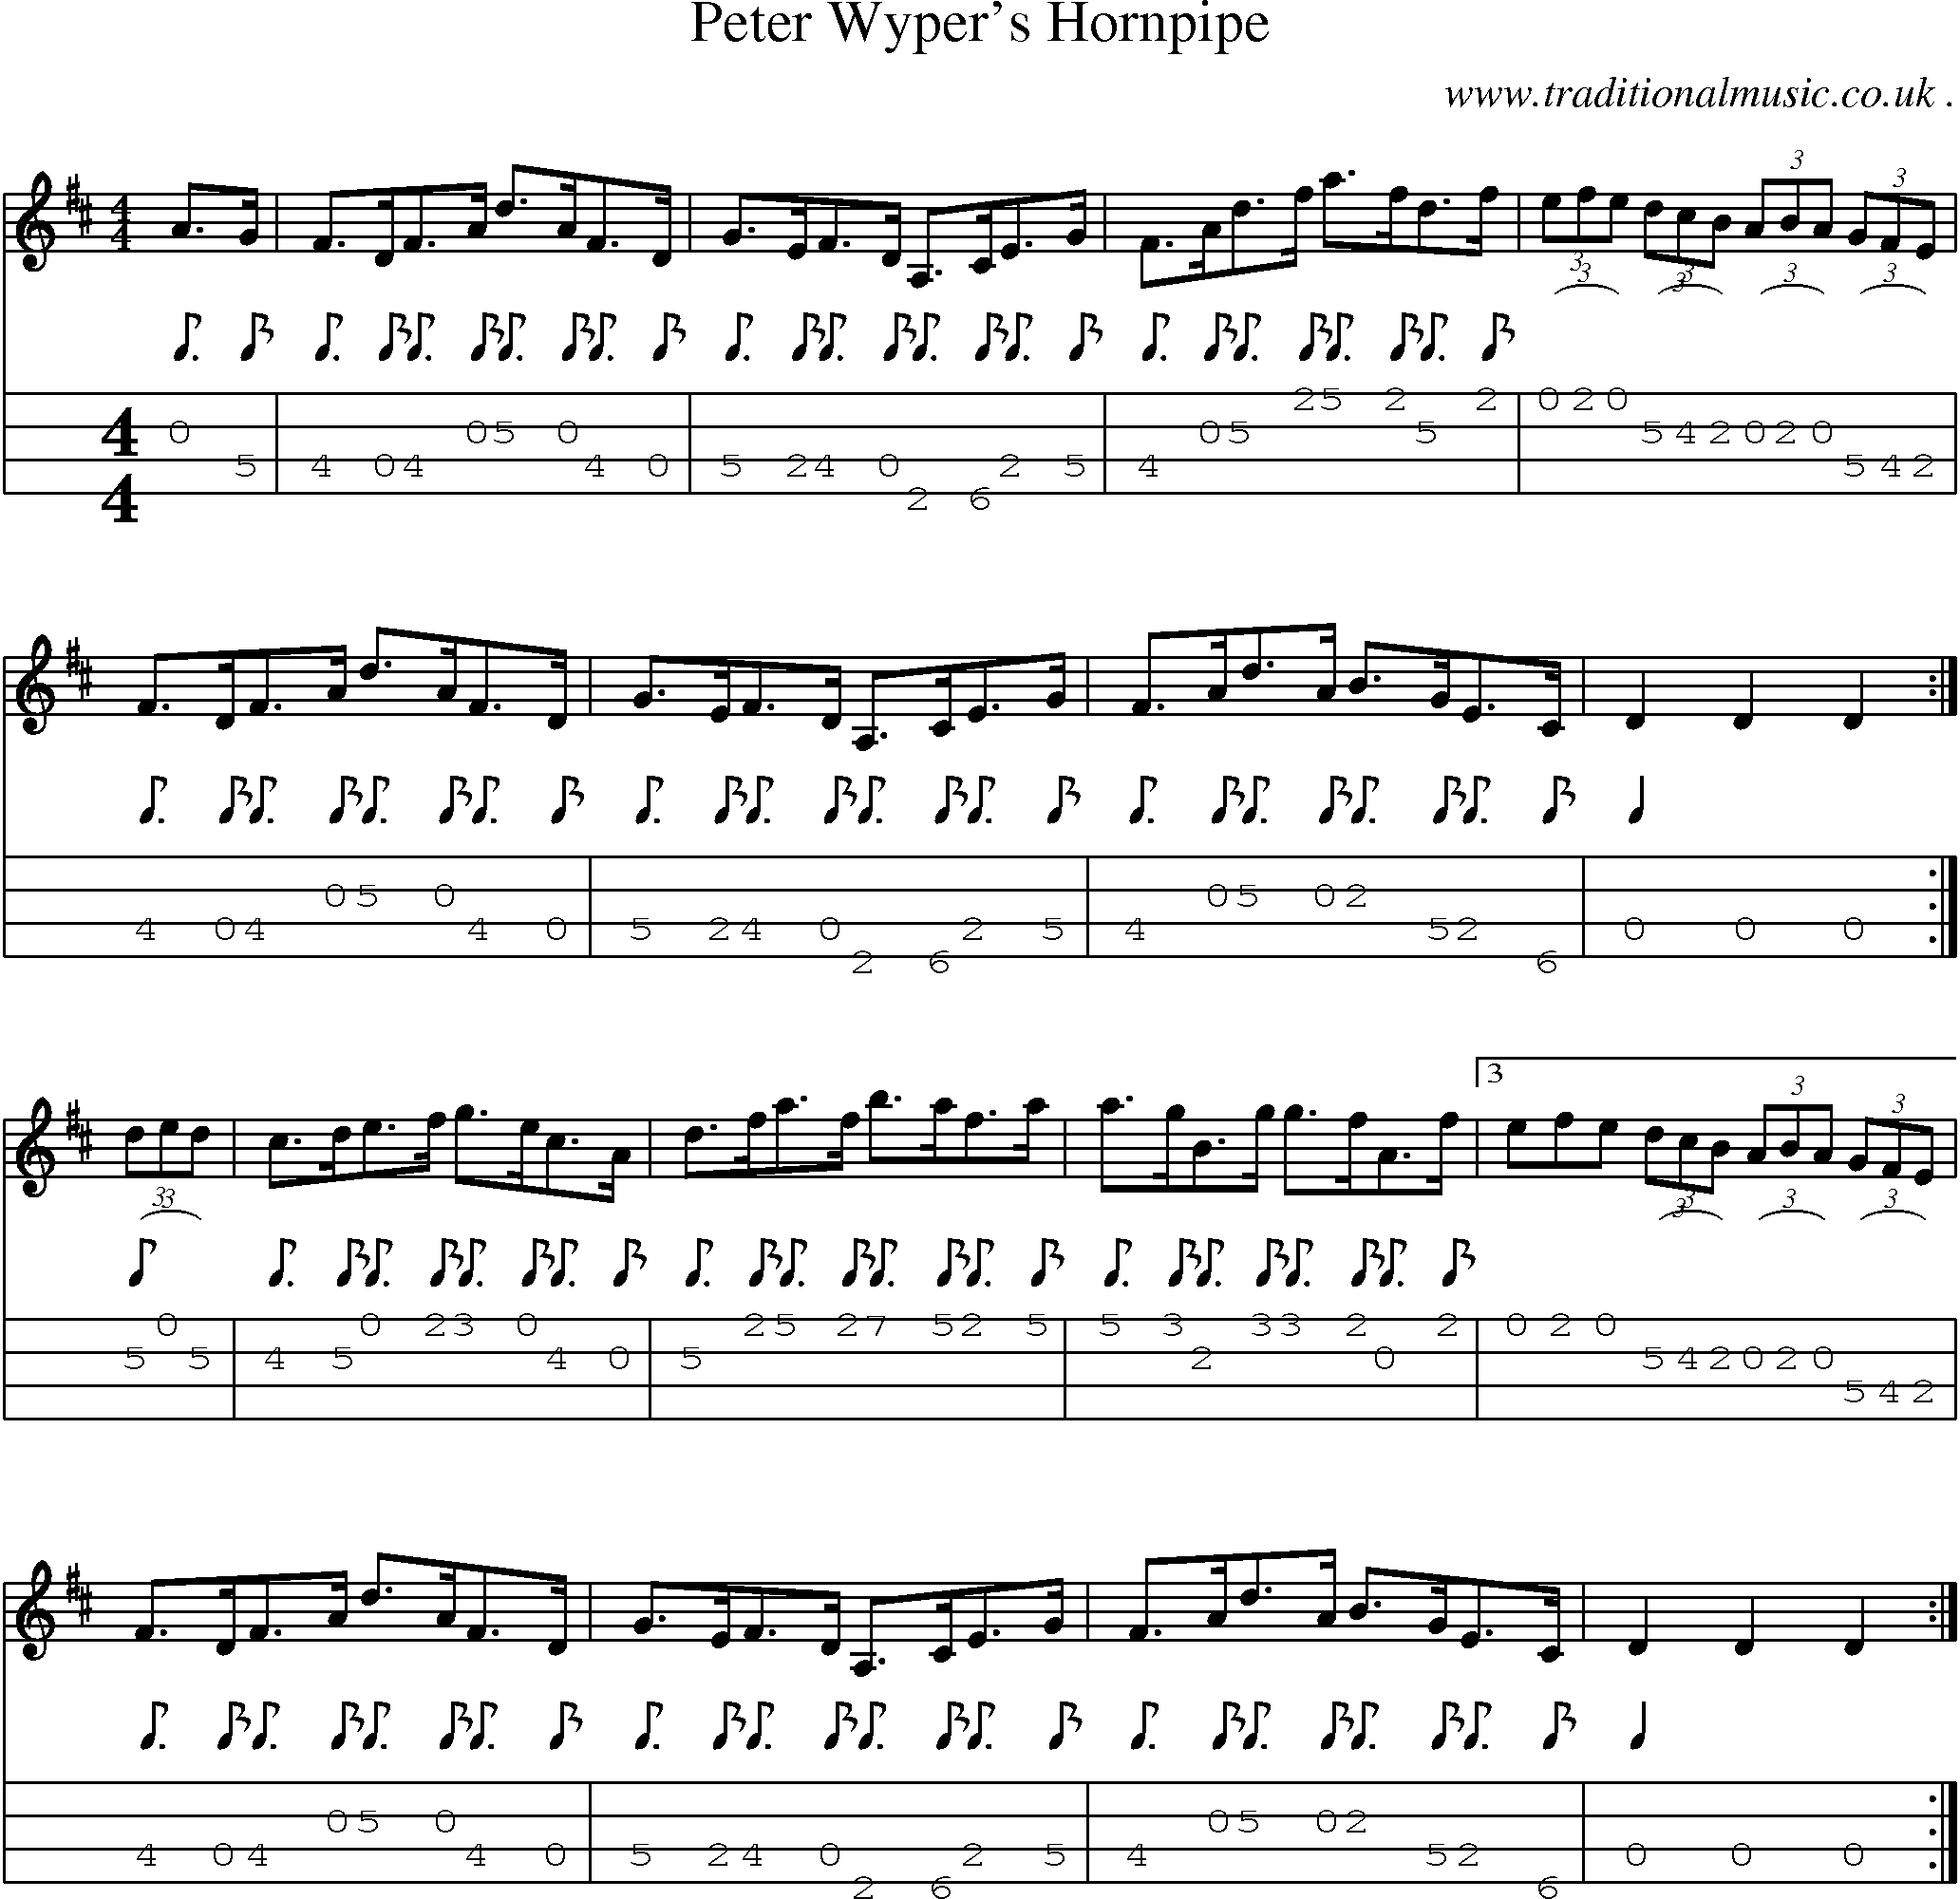 Sheet-music  score, Chords and Mandolin Tabs for Peter Wypers Hornpipe